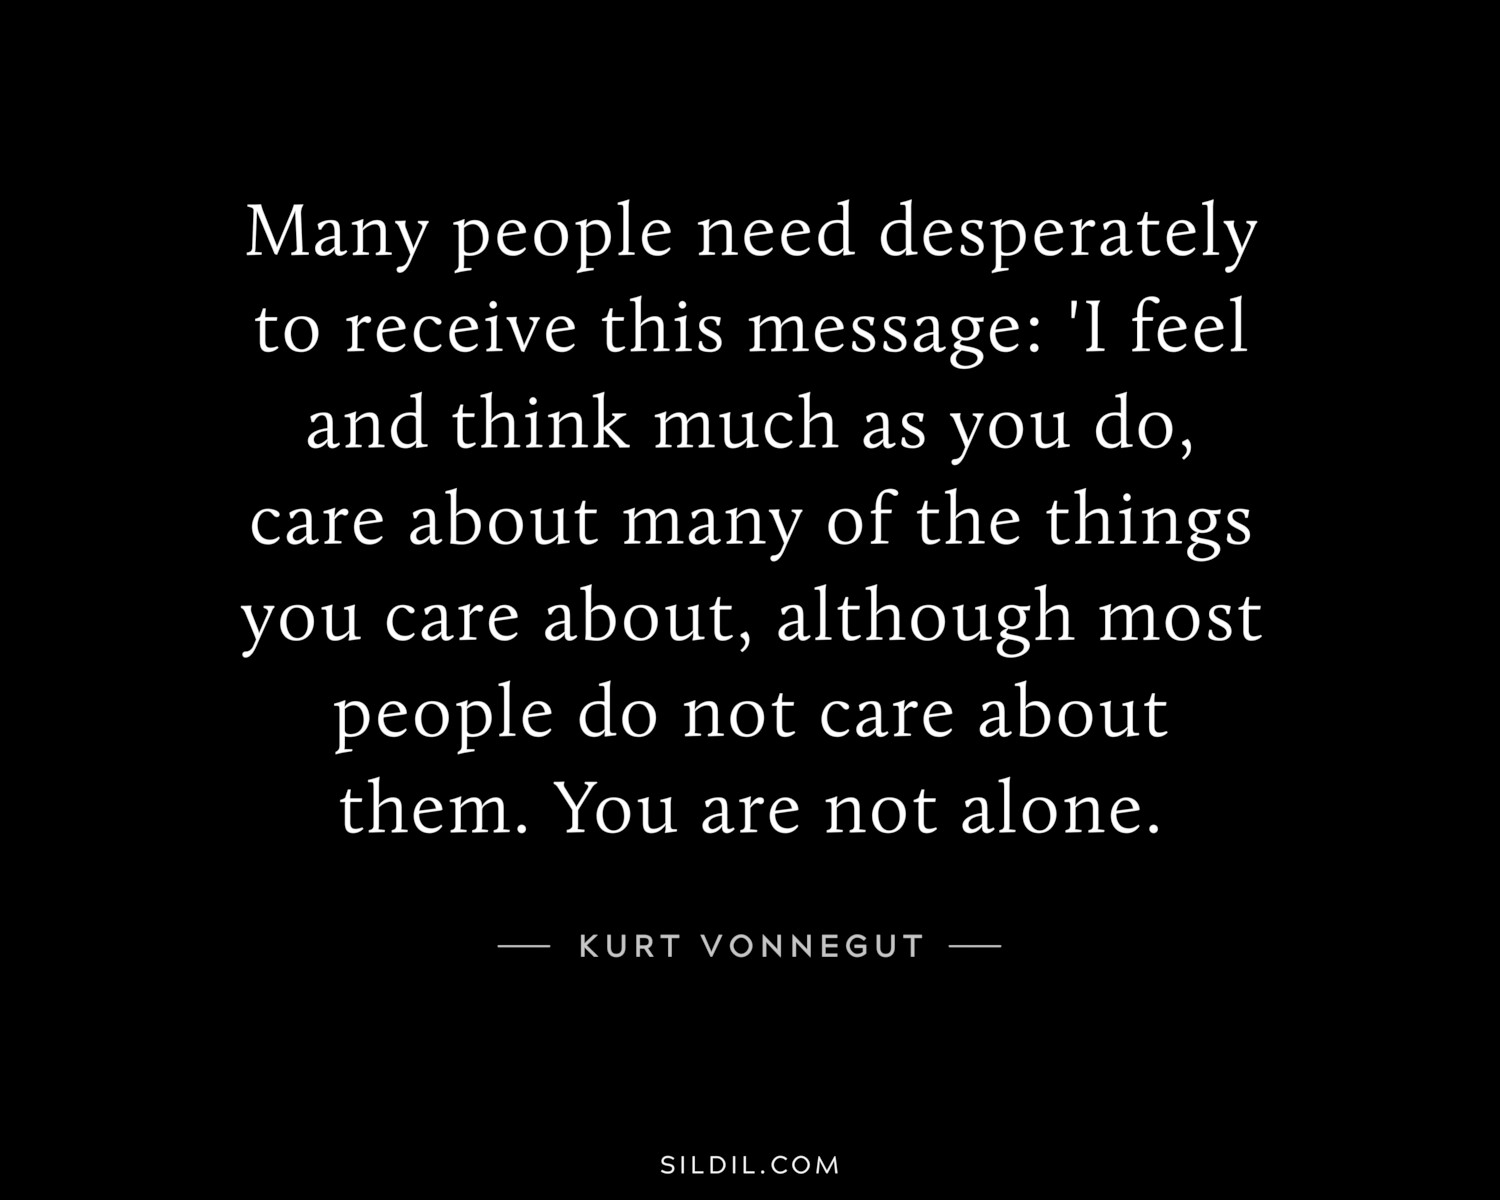 Many people need desperately to receive this message: 'I feel and think much as you do, care about many of the things you care about, although most people do not care about them. You are not alone.